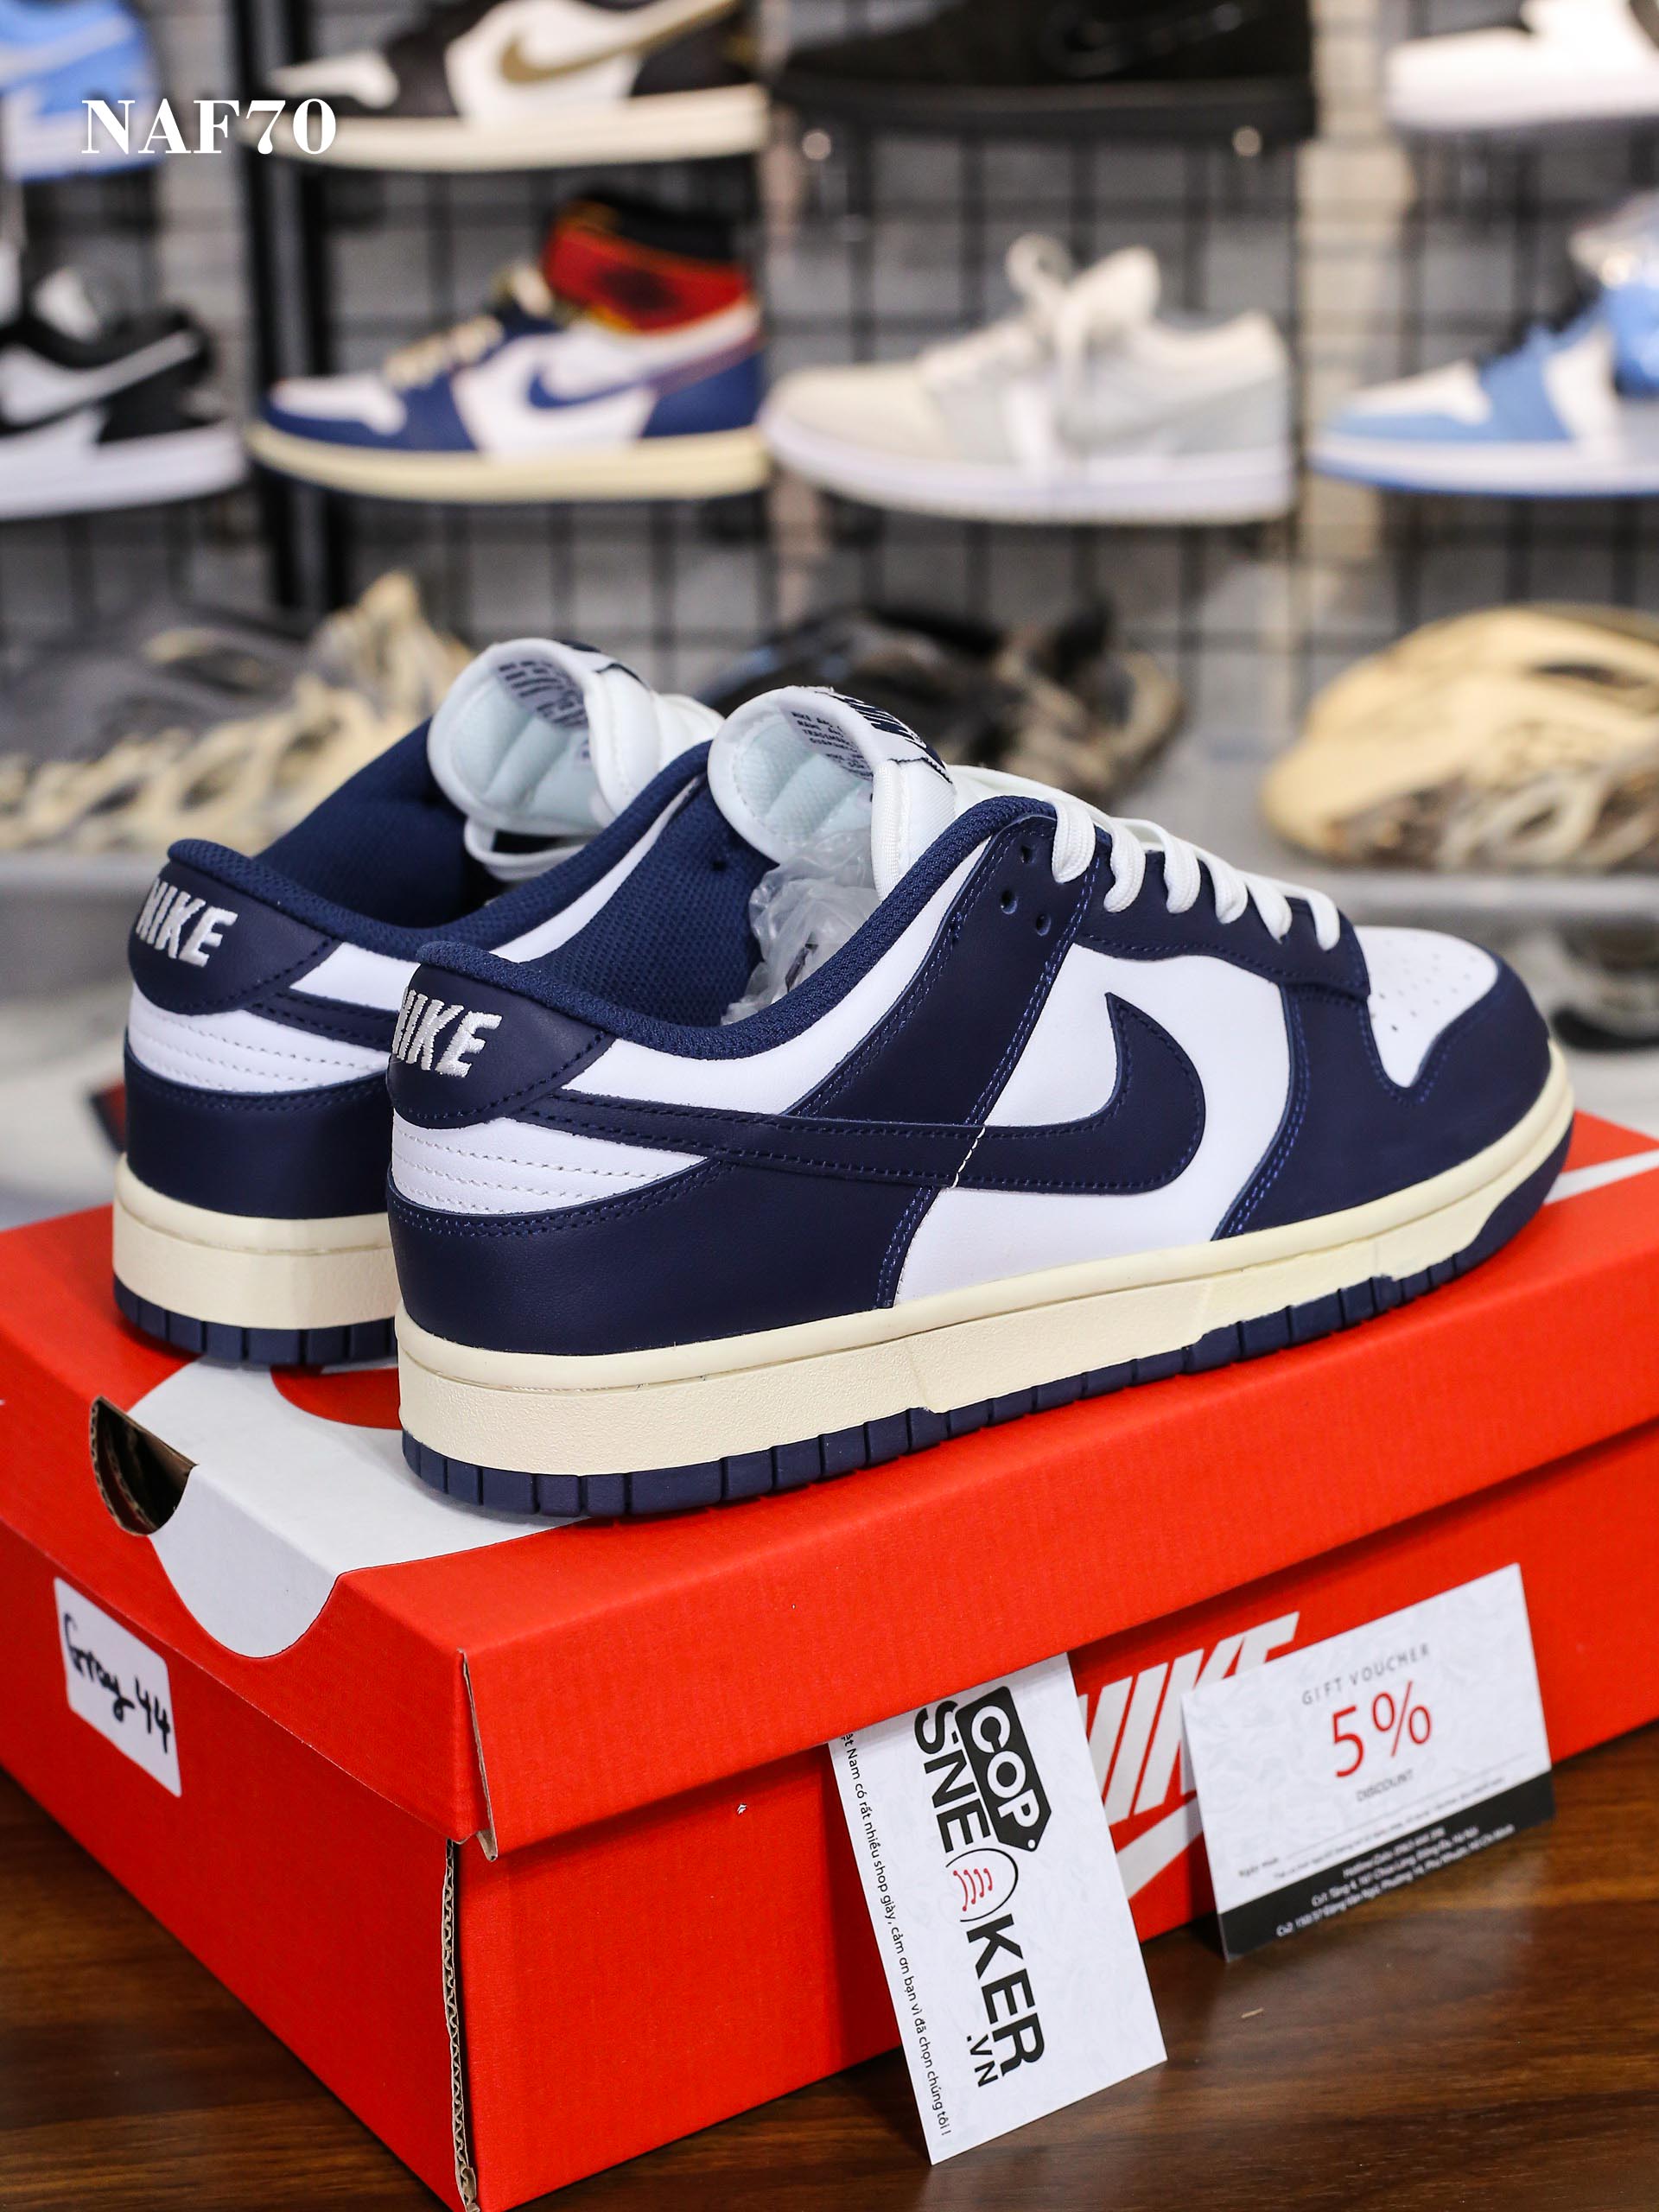 Giày Nike Dunk Low ‘Vintage Xanh Navy’ Like Auth